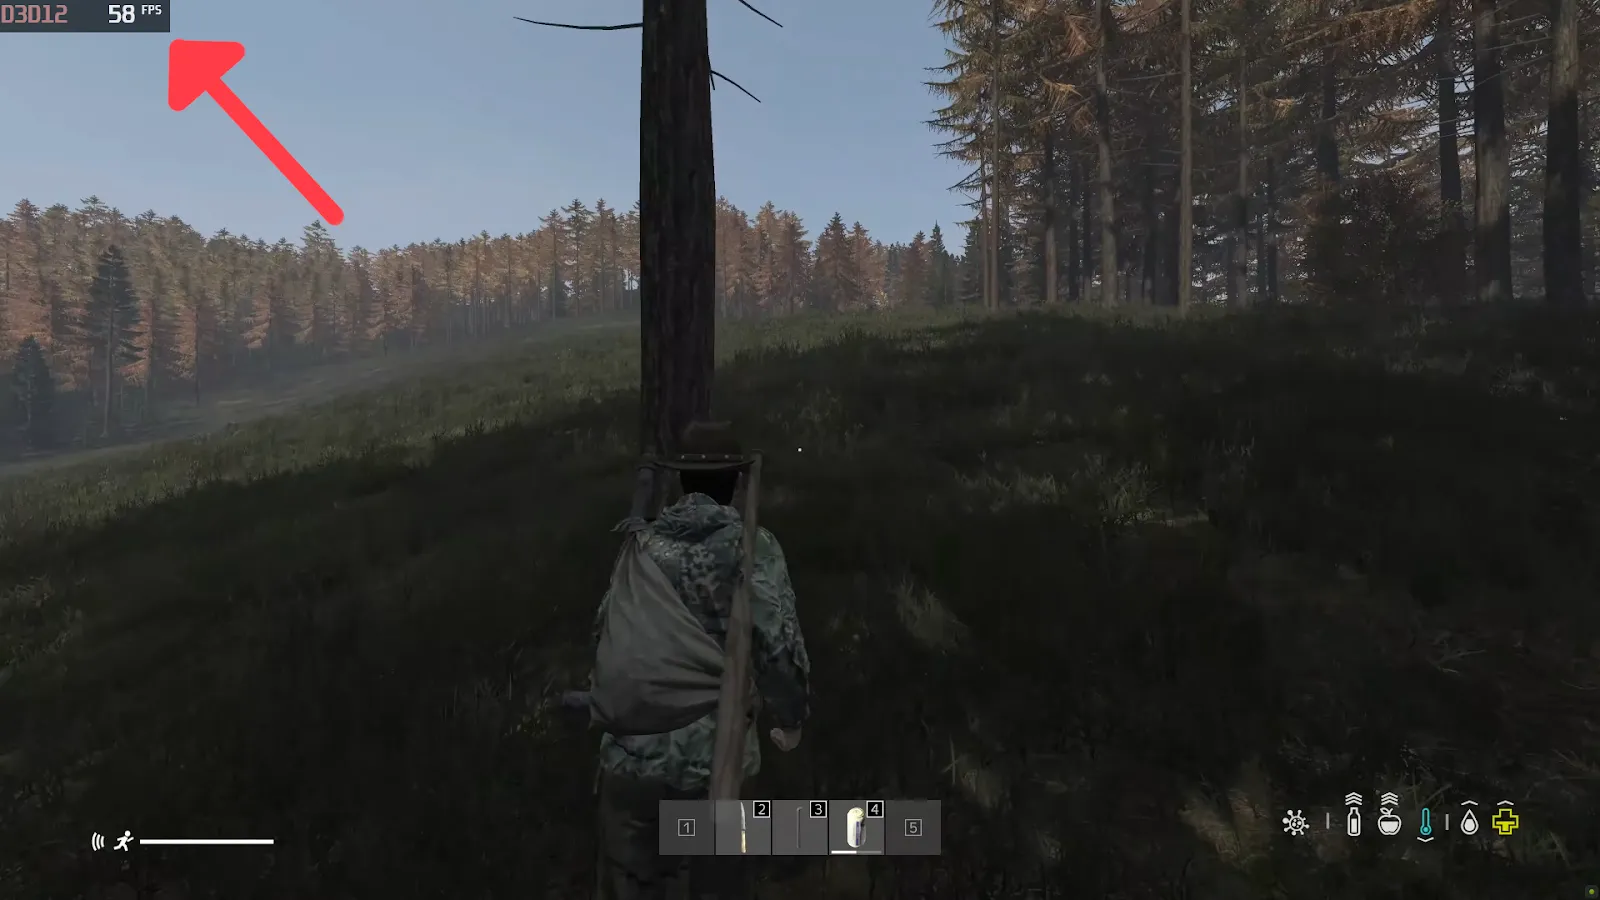 MSI show FPS in DAYZ